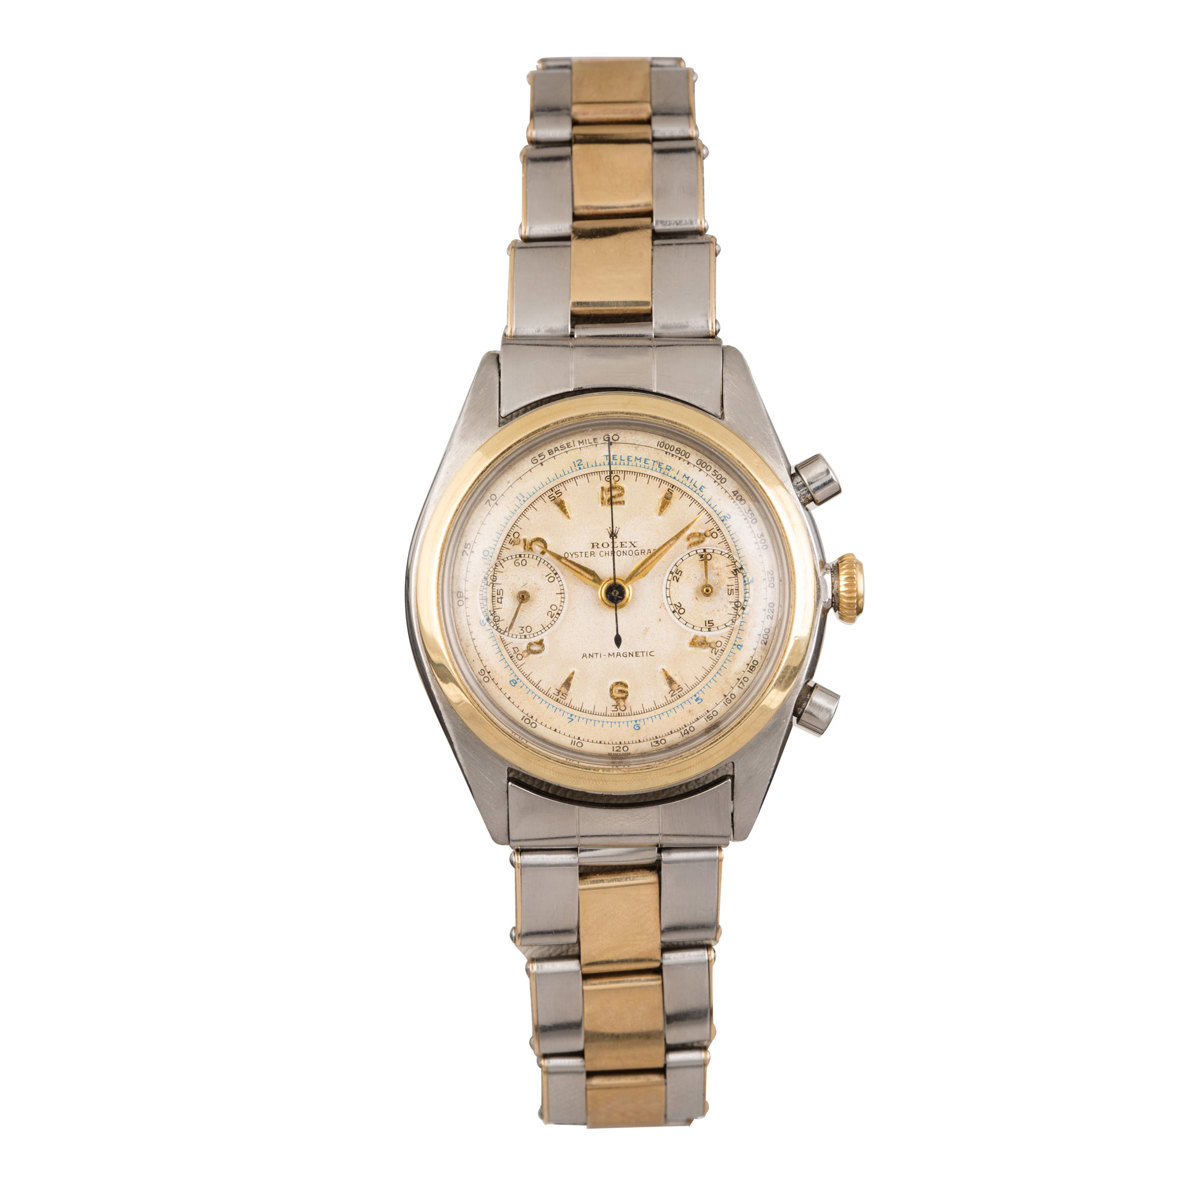 Rolex Pre-Daytona Ref 4500 A Stainless Steel and Yellow Gold Chronograph Wristwatch with Bracelet 1947 offered by Sotheby's